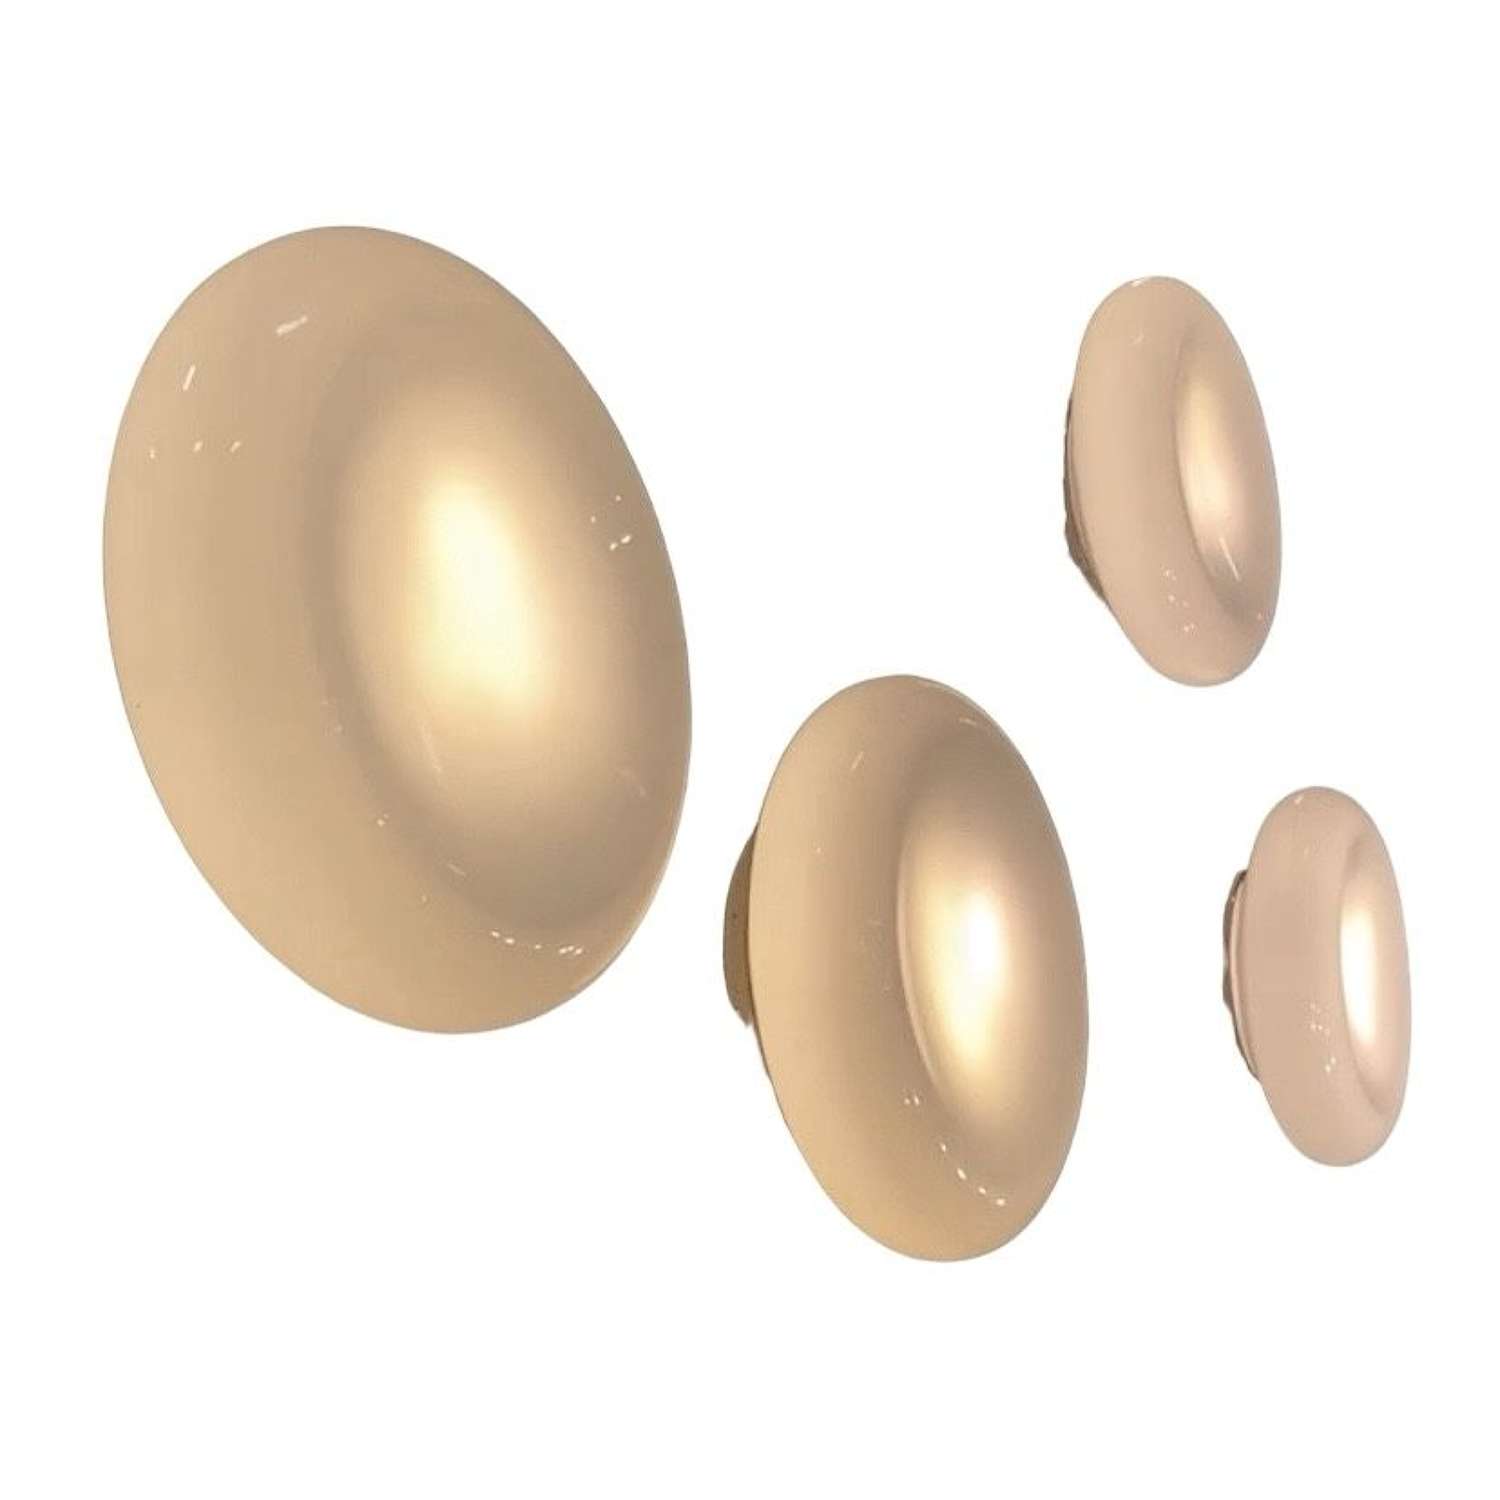 4 glass wall lights or flush mounted plafoniers